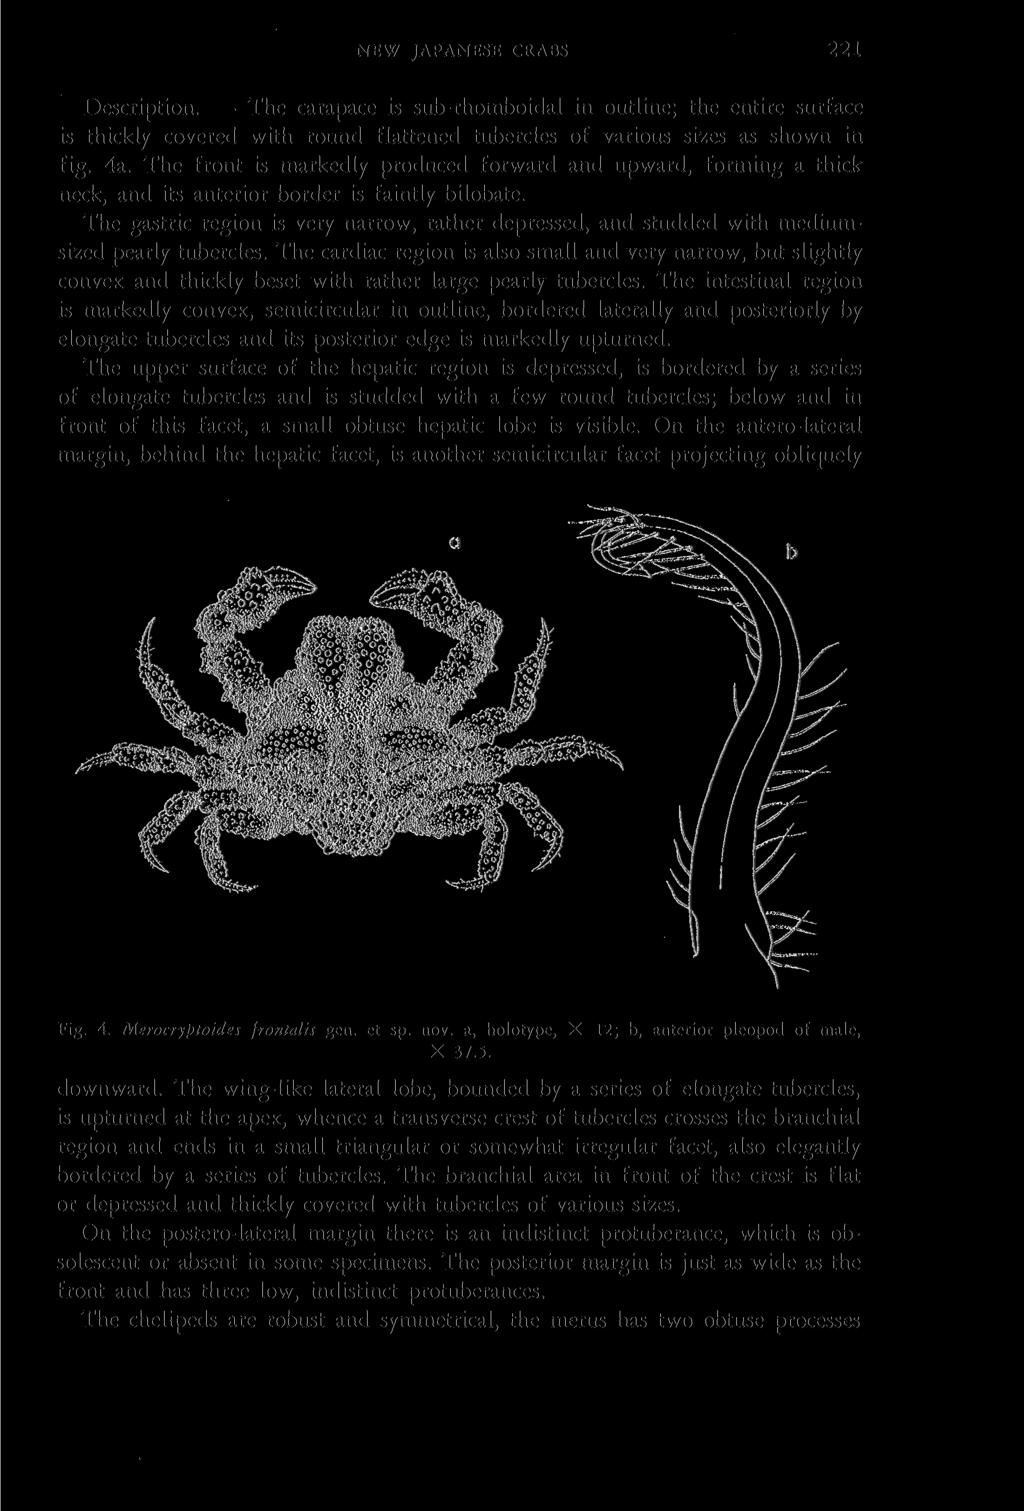 NEW JAPANESE CRABS 221 Description. The carapace is sub-rhomboidal in outline; the entire surface is thickly covered with round flattened tubercles of various sizes as shown in fig. 4a.